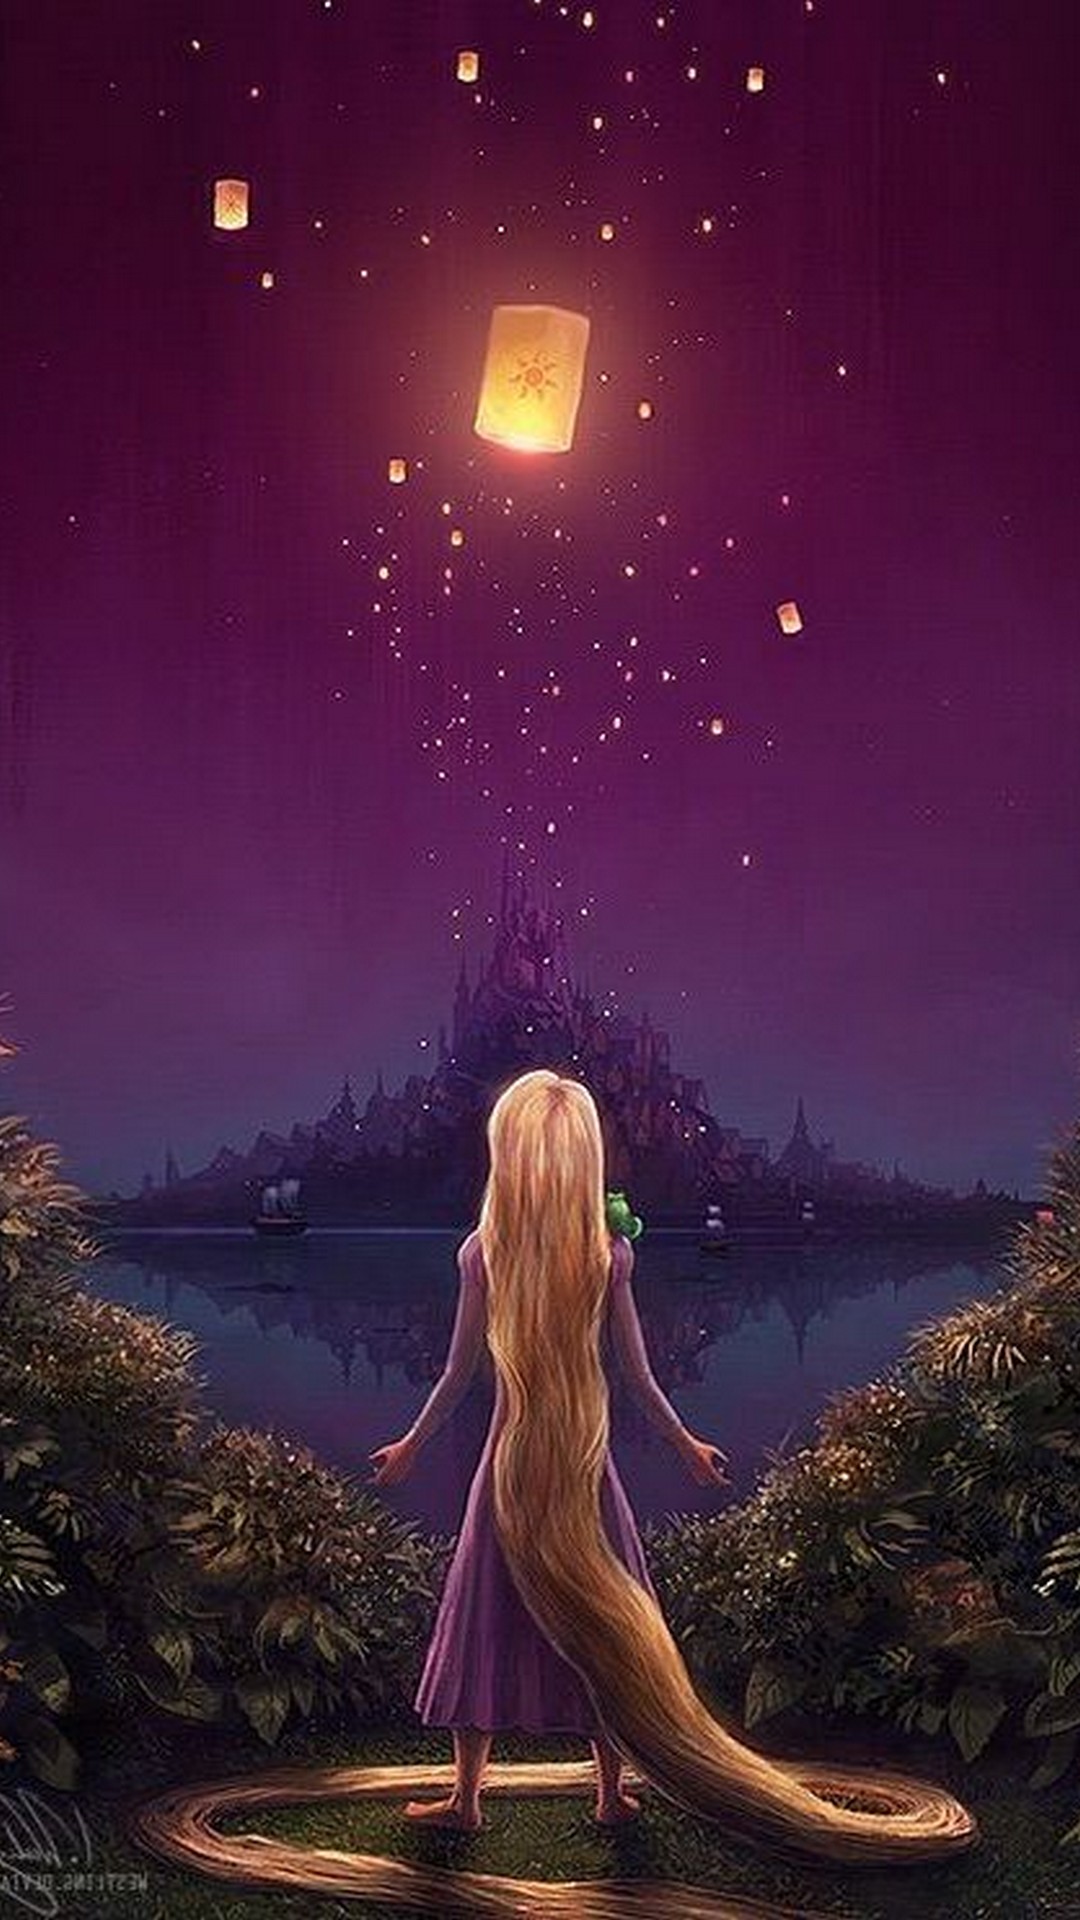 Sleeping Beauty Wallpaper Iphone : I'm actually selling ...